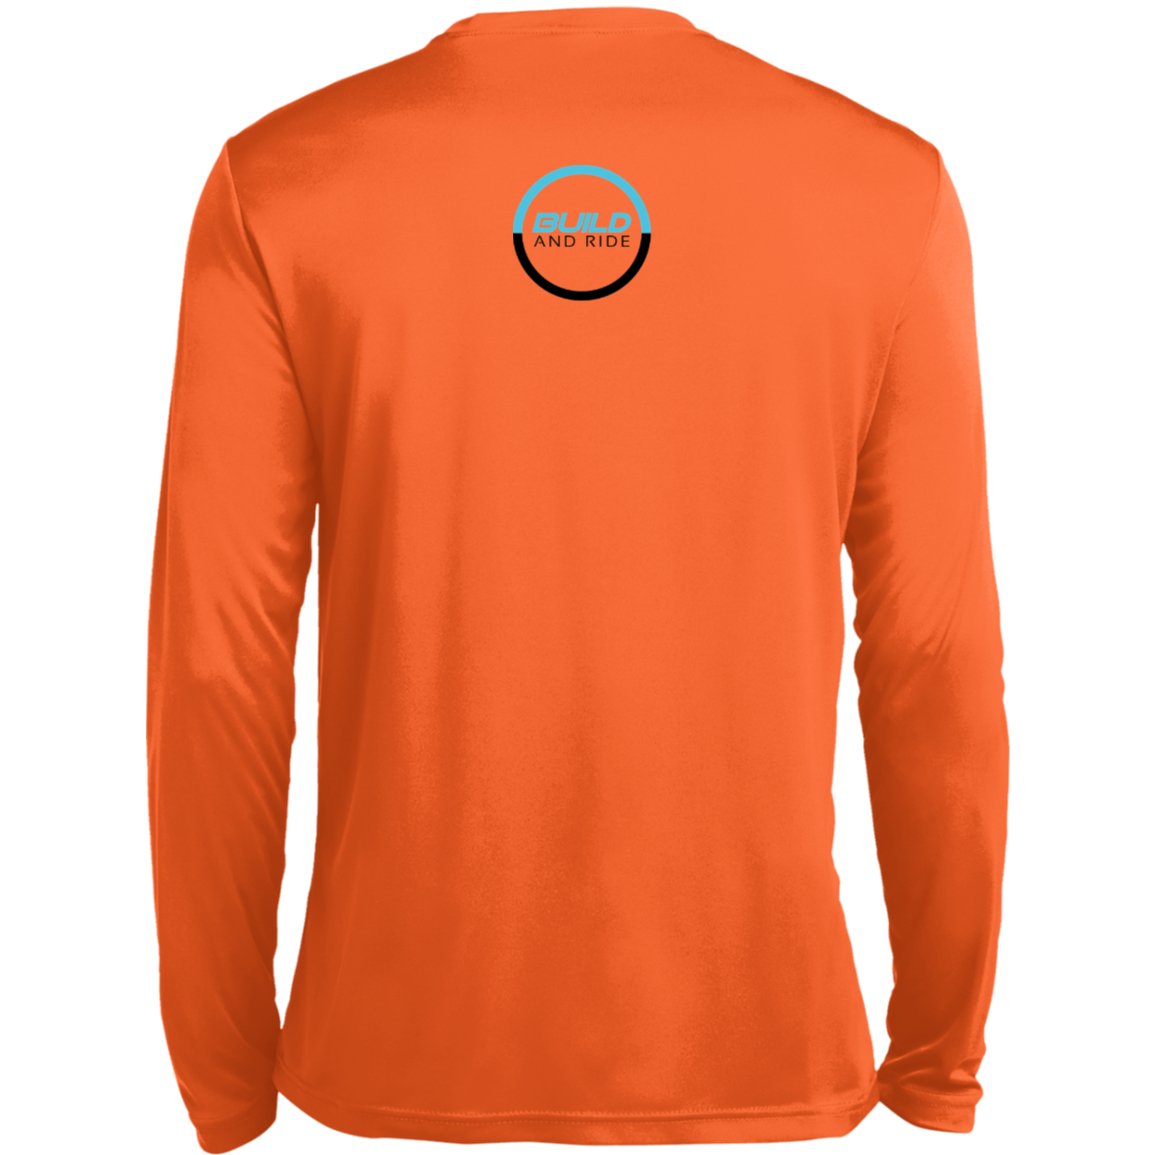 Build And Ride 2 Long Sleeve Moisture-Wicking Tee - Build And Ride